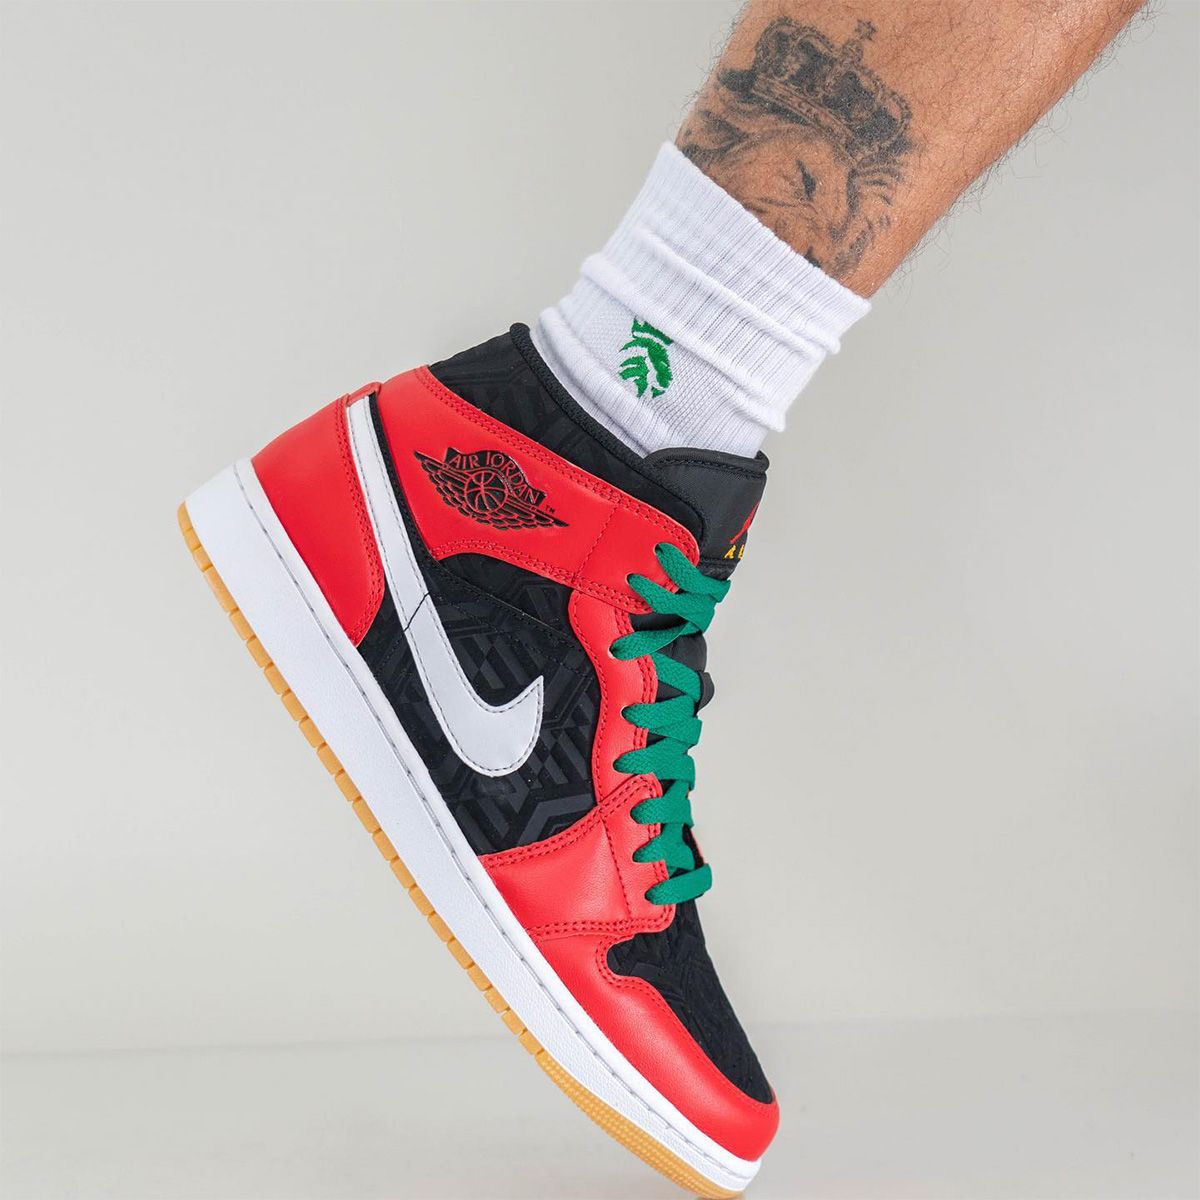 Official Images // Air Jordan 1 Mid “Holiday Special” | House of Heat°